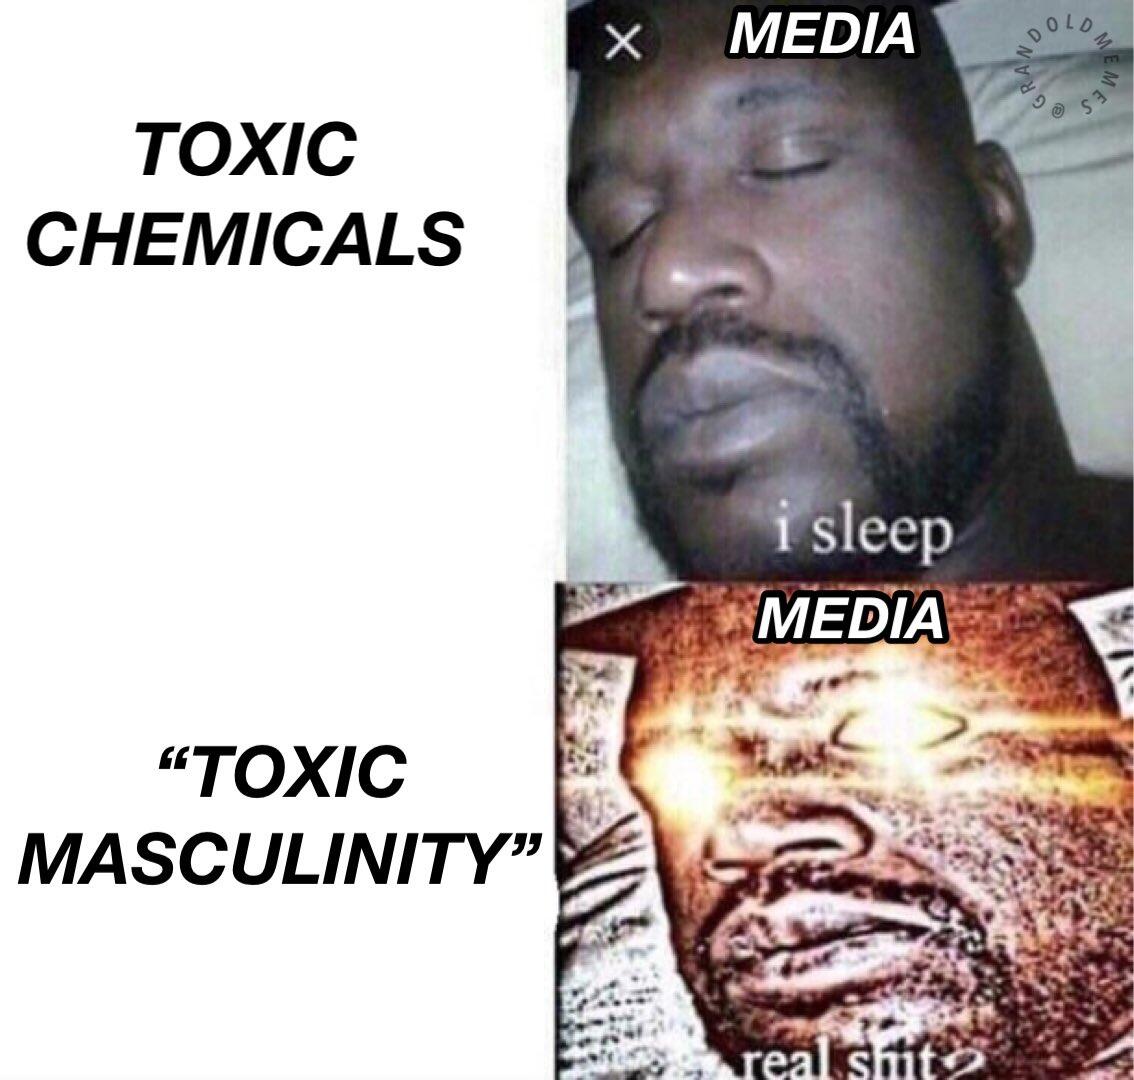 #ToxicChemicals
VS.
#ToxicMasculinity